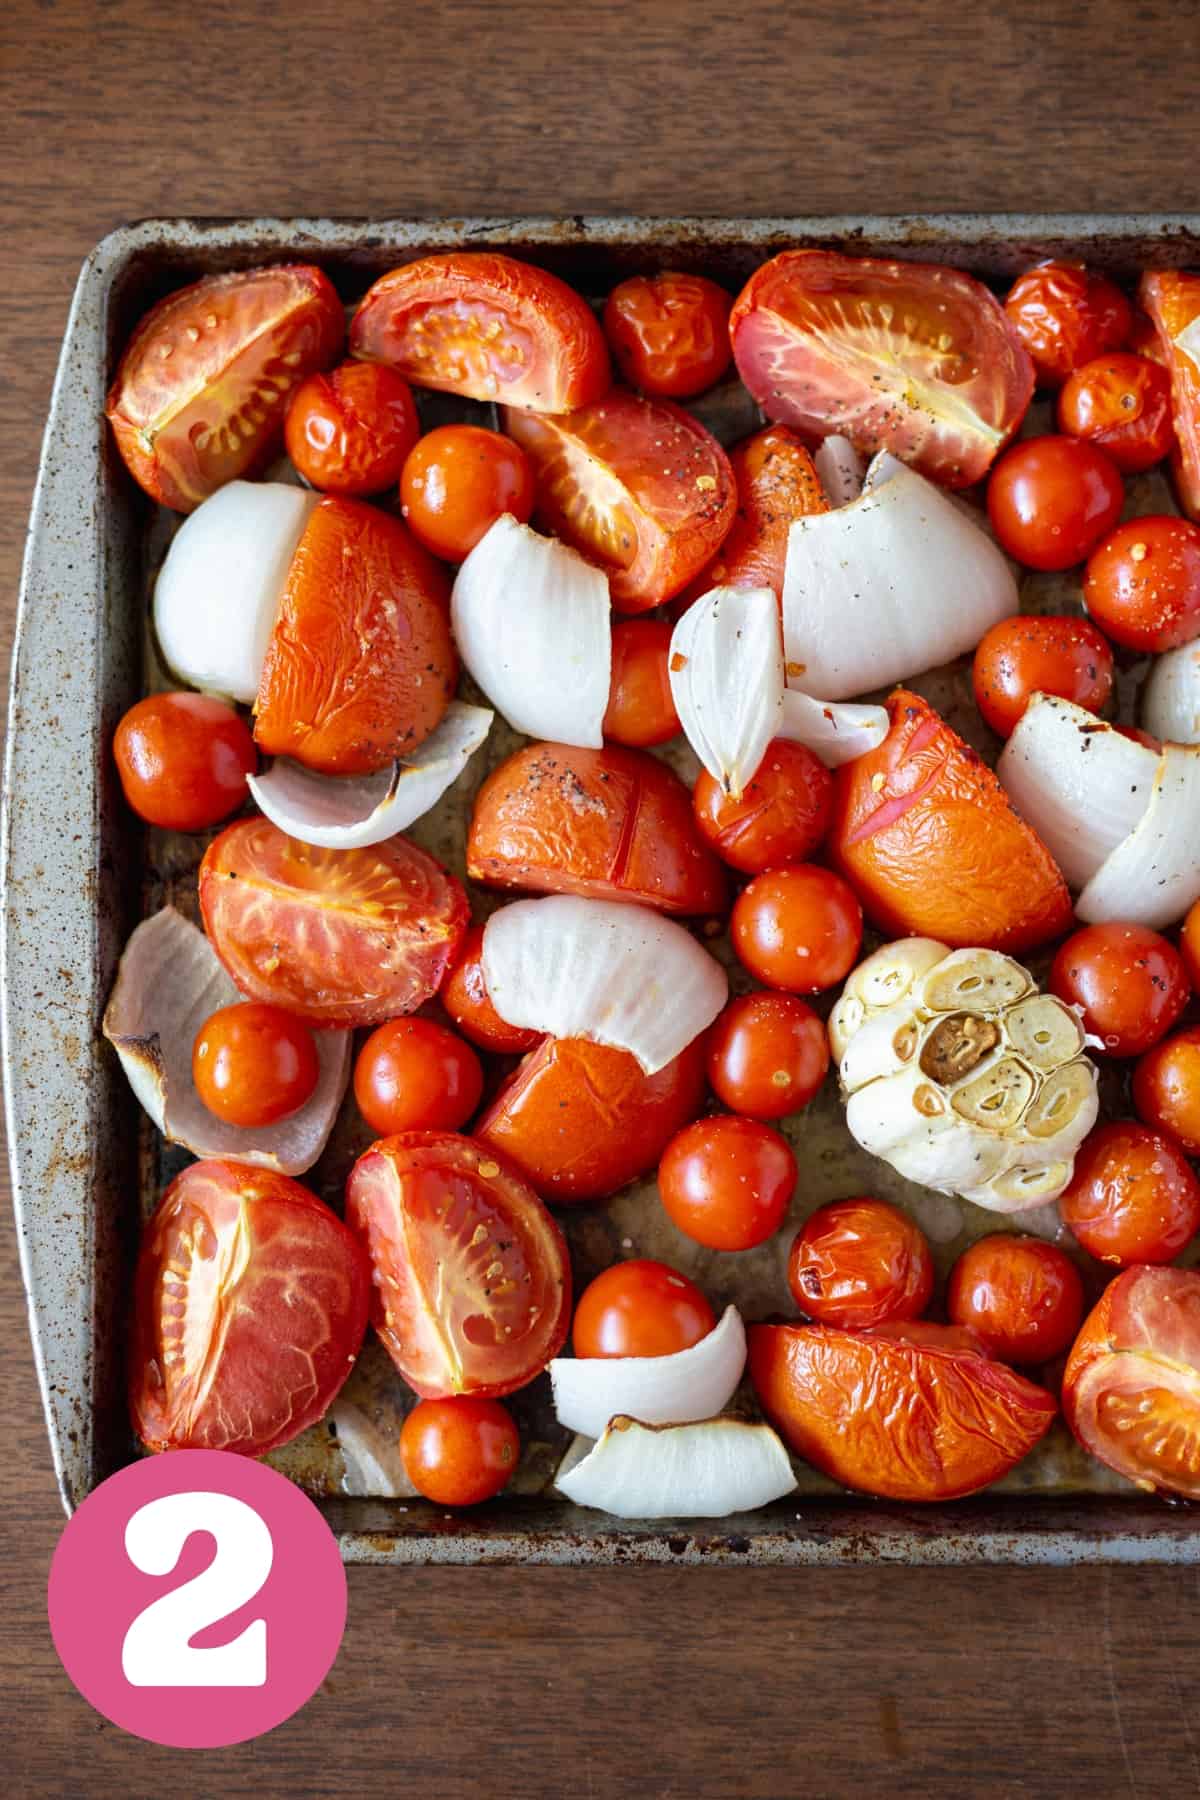 Tray of roasted tomatoes and onions and garlic with seasonings and oil